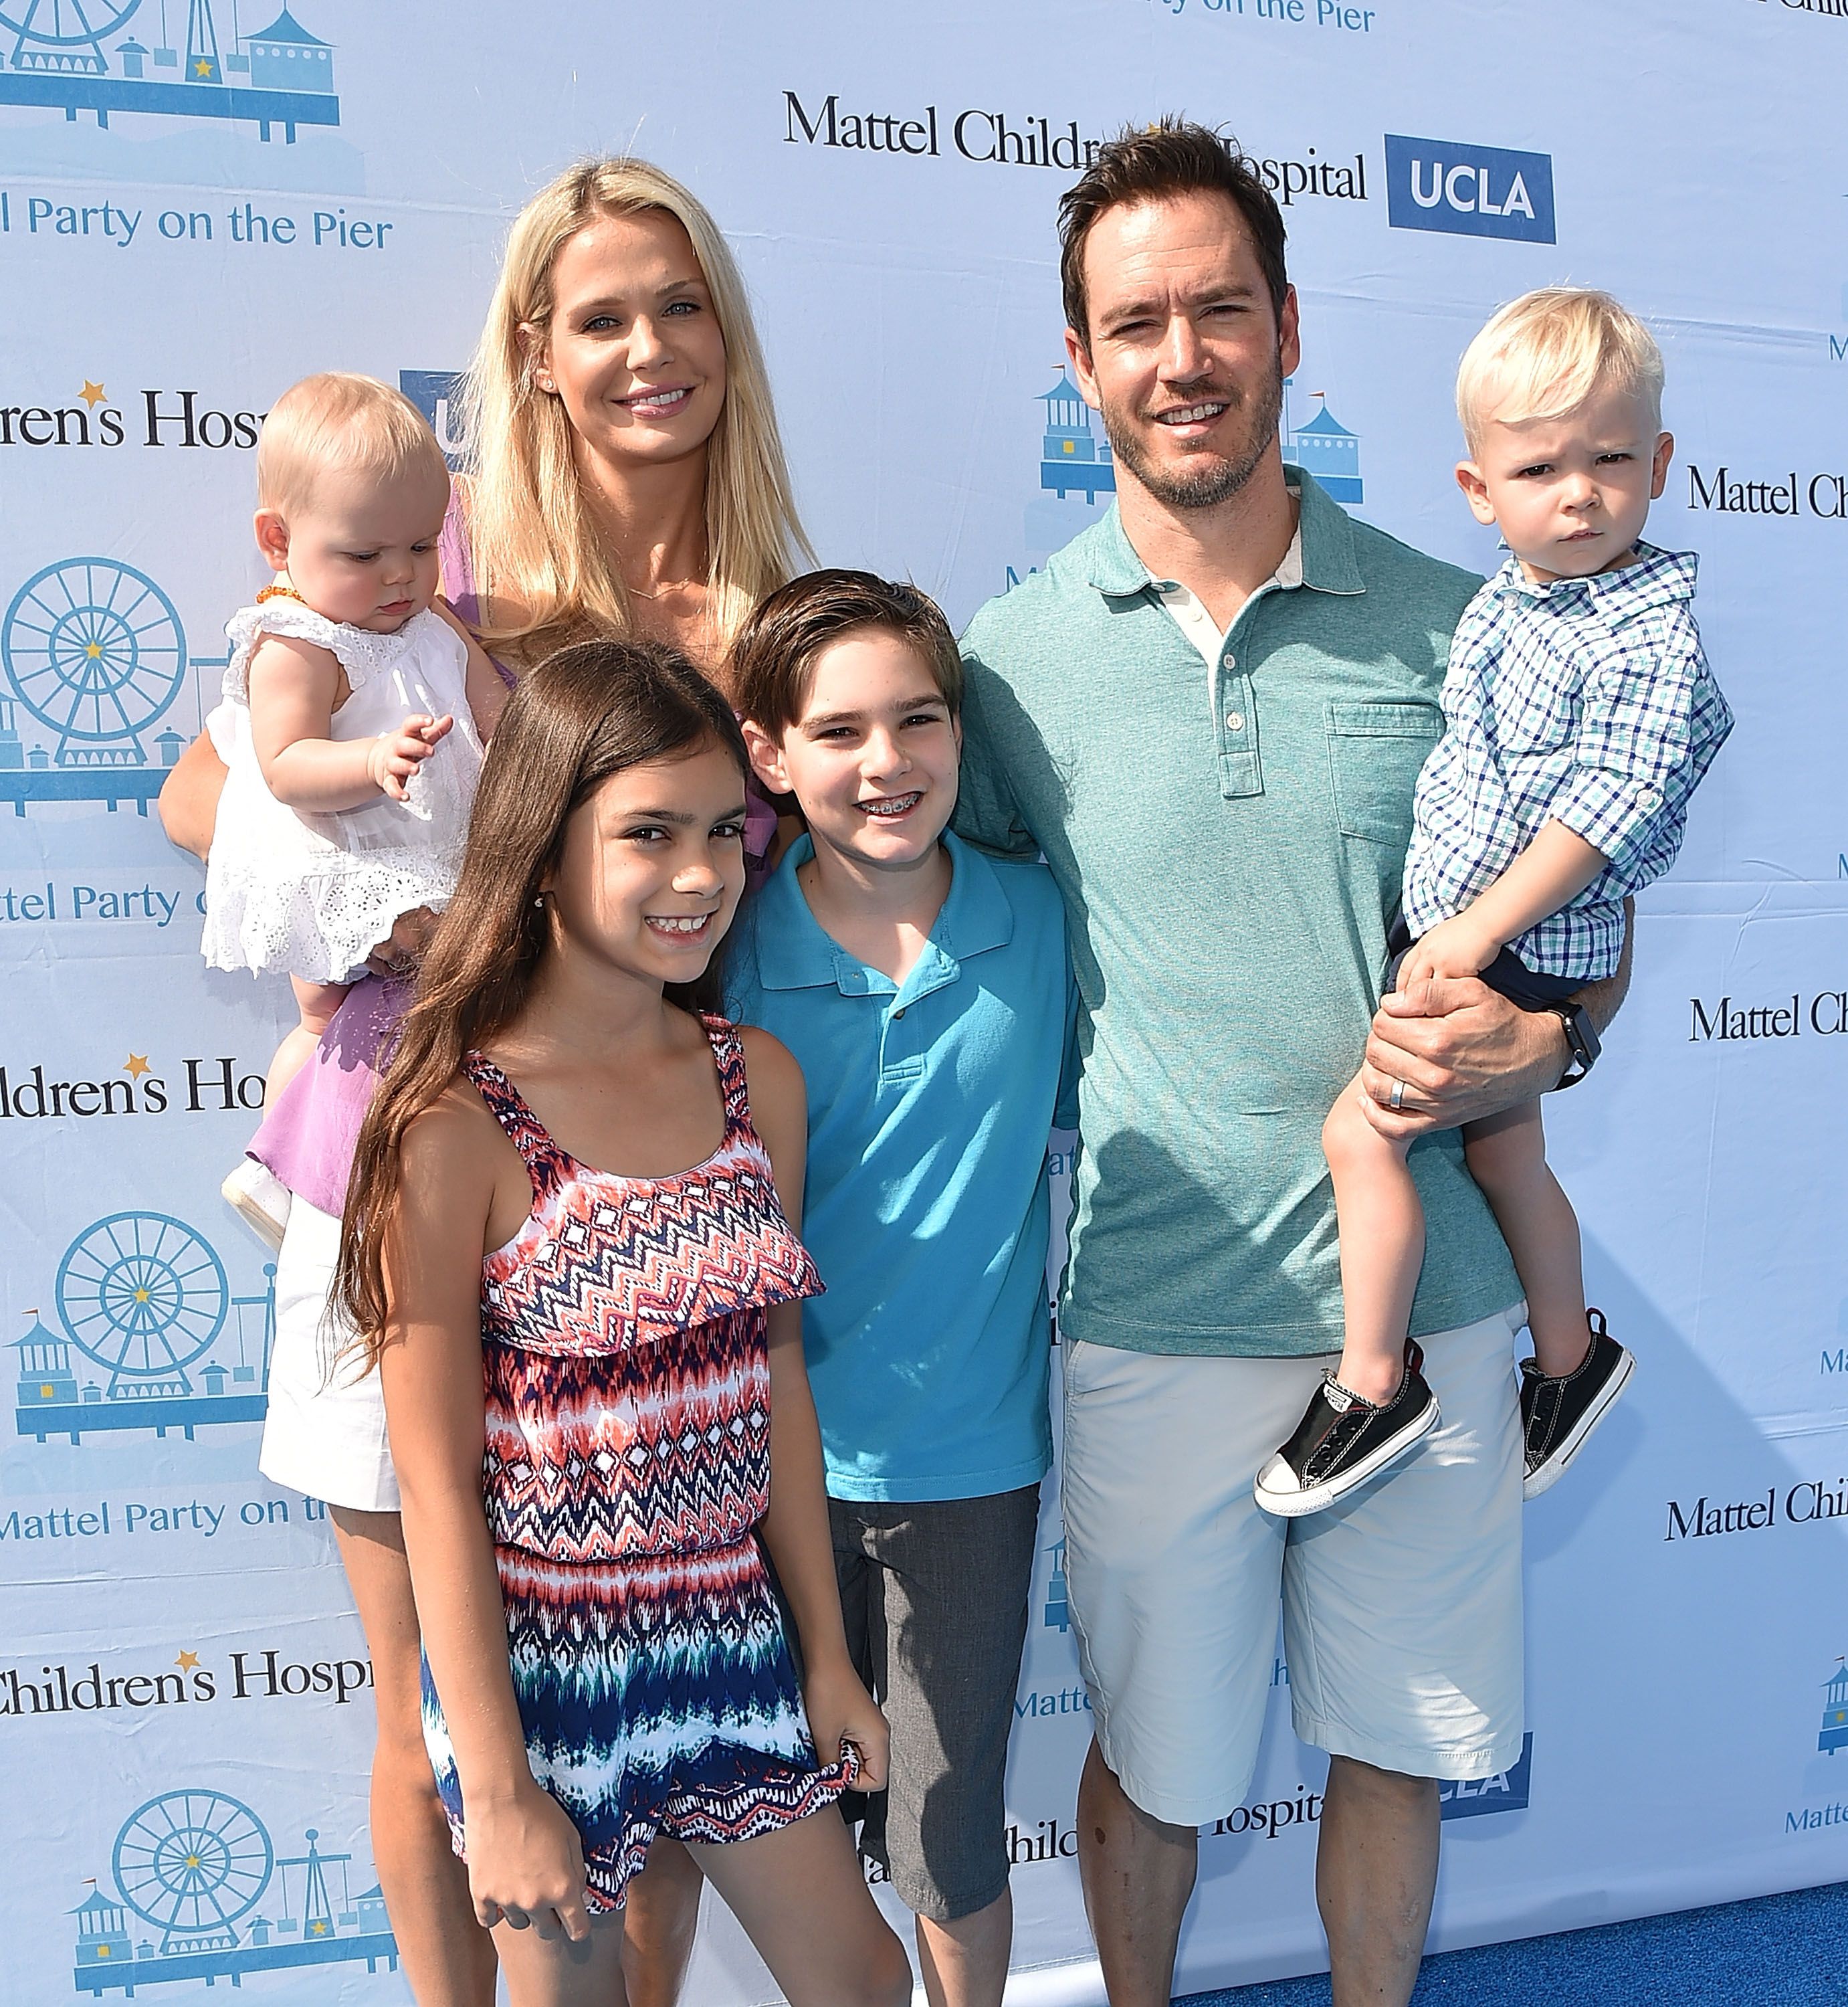 Mark-Paul Gosselaar, Catriona McGinn and their children during the Mattel Party On The Pier at Santa Monica Pier on September 27, 2015 in Santa Monica, California. | Source: Getty Images